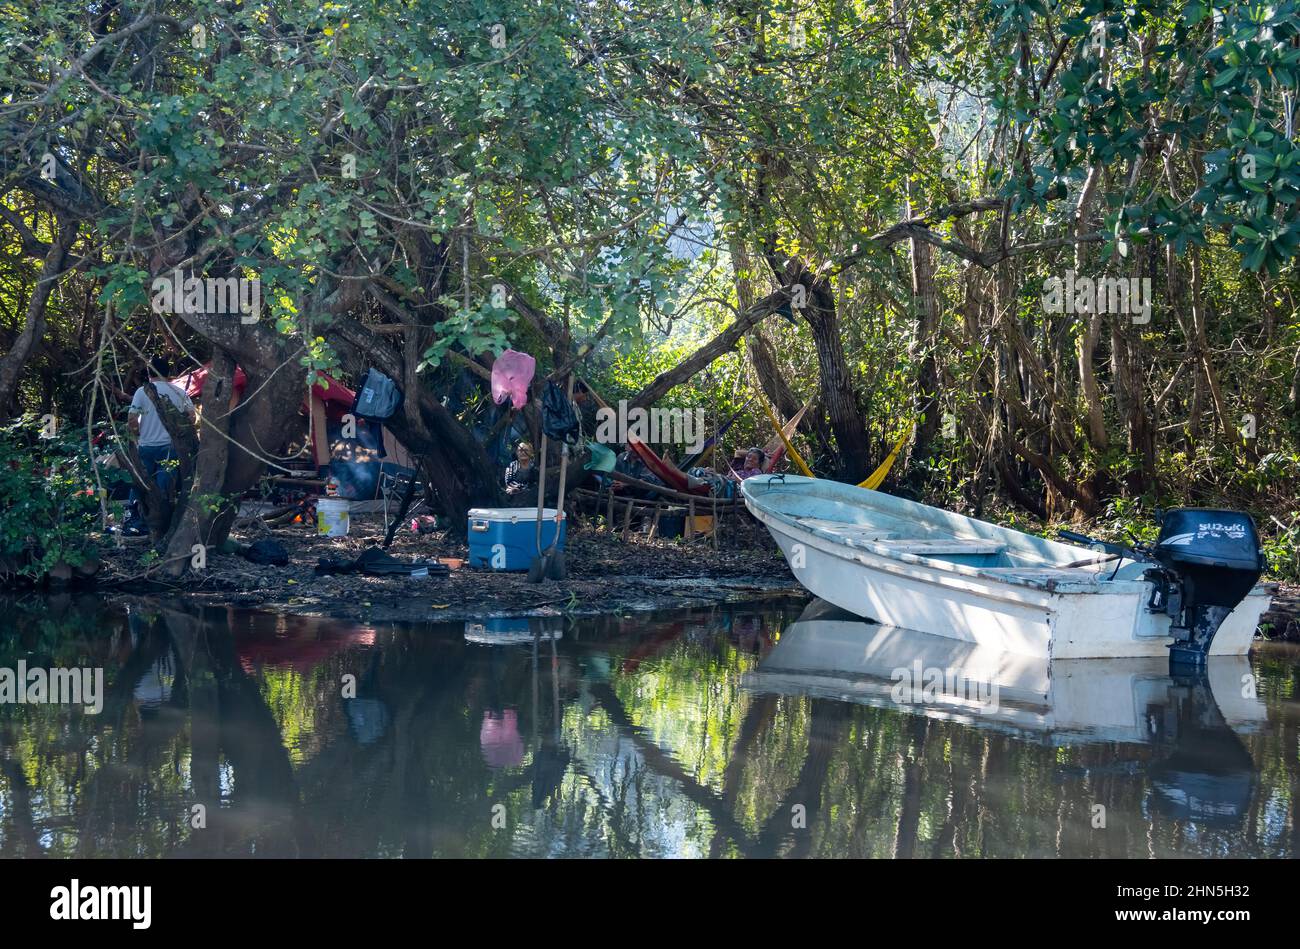 Workers hired to clean up the river set up camp along the river. San Blas, Nayarit, Mexico. Stock Photo